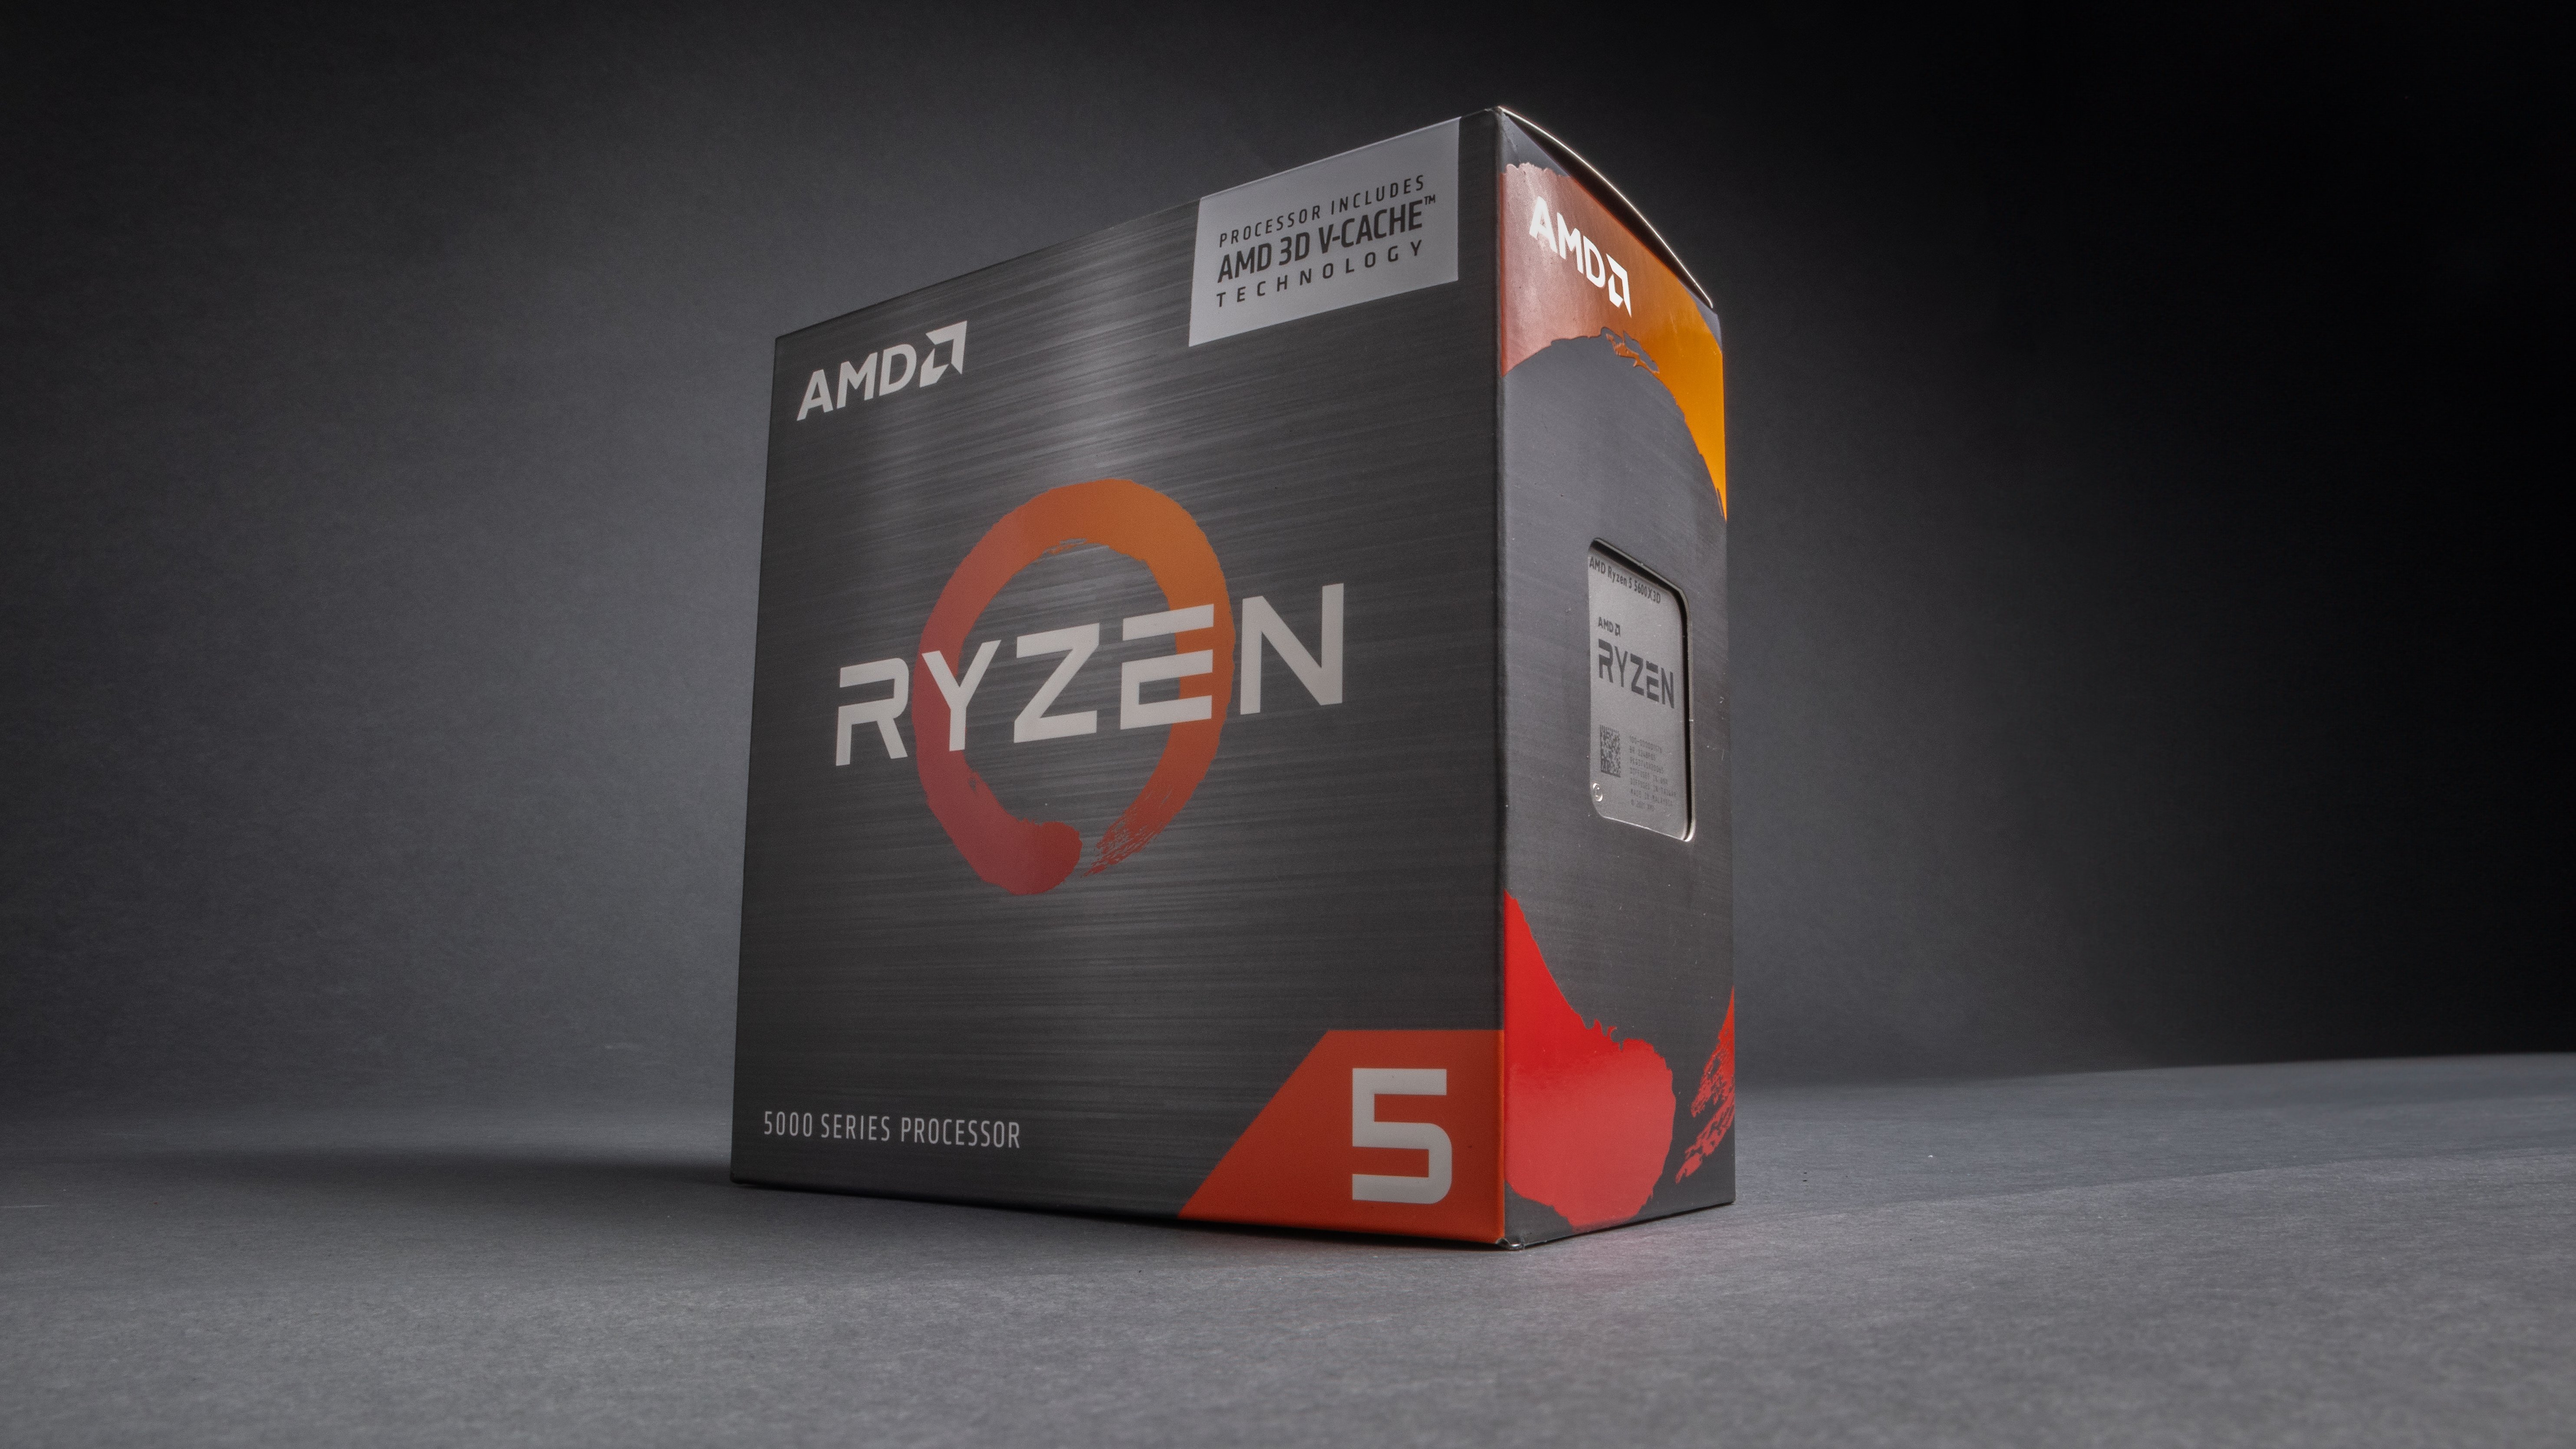  AMD's Ryzen 5 5600X3D sounds like a killer budget gaming chip we could do without being limited edition 